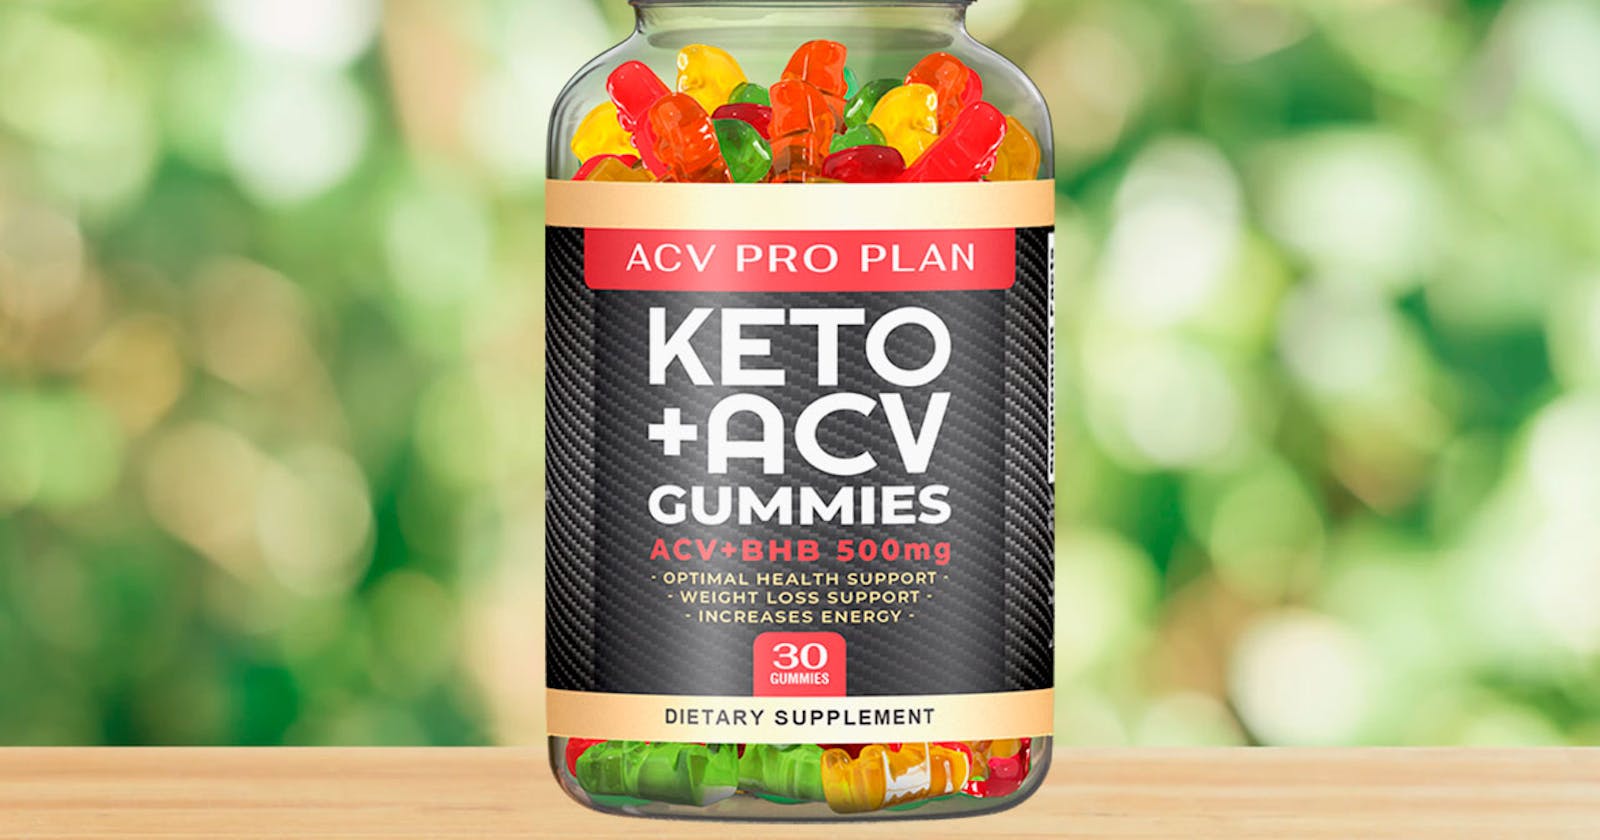 ACV Keto Pro Gummies Australia: Trend in Weight Loss Supplements!